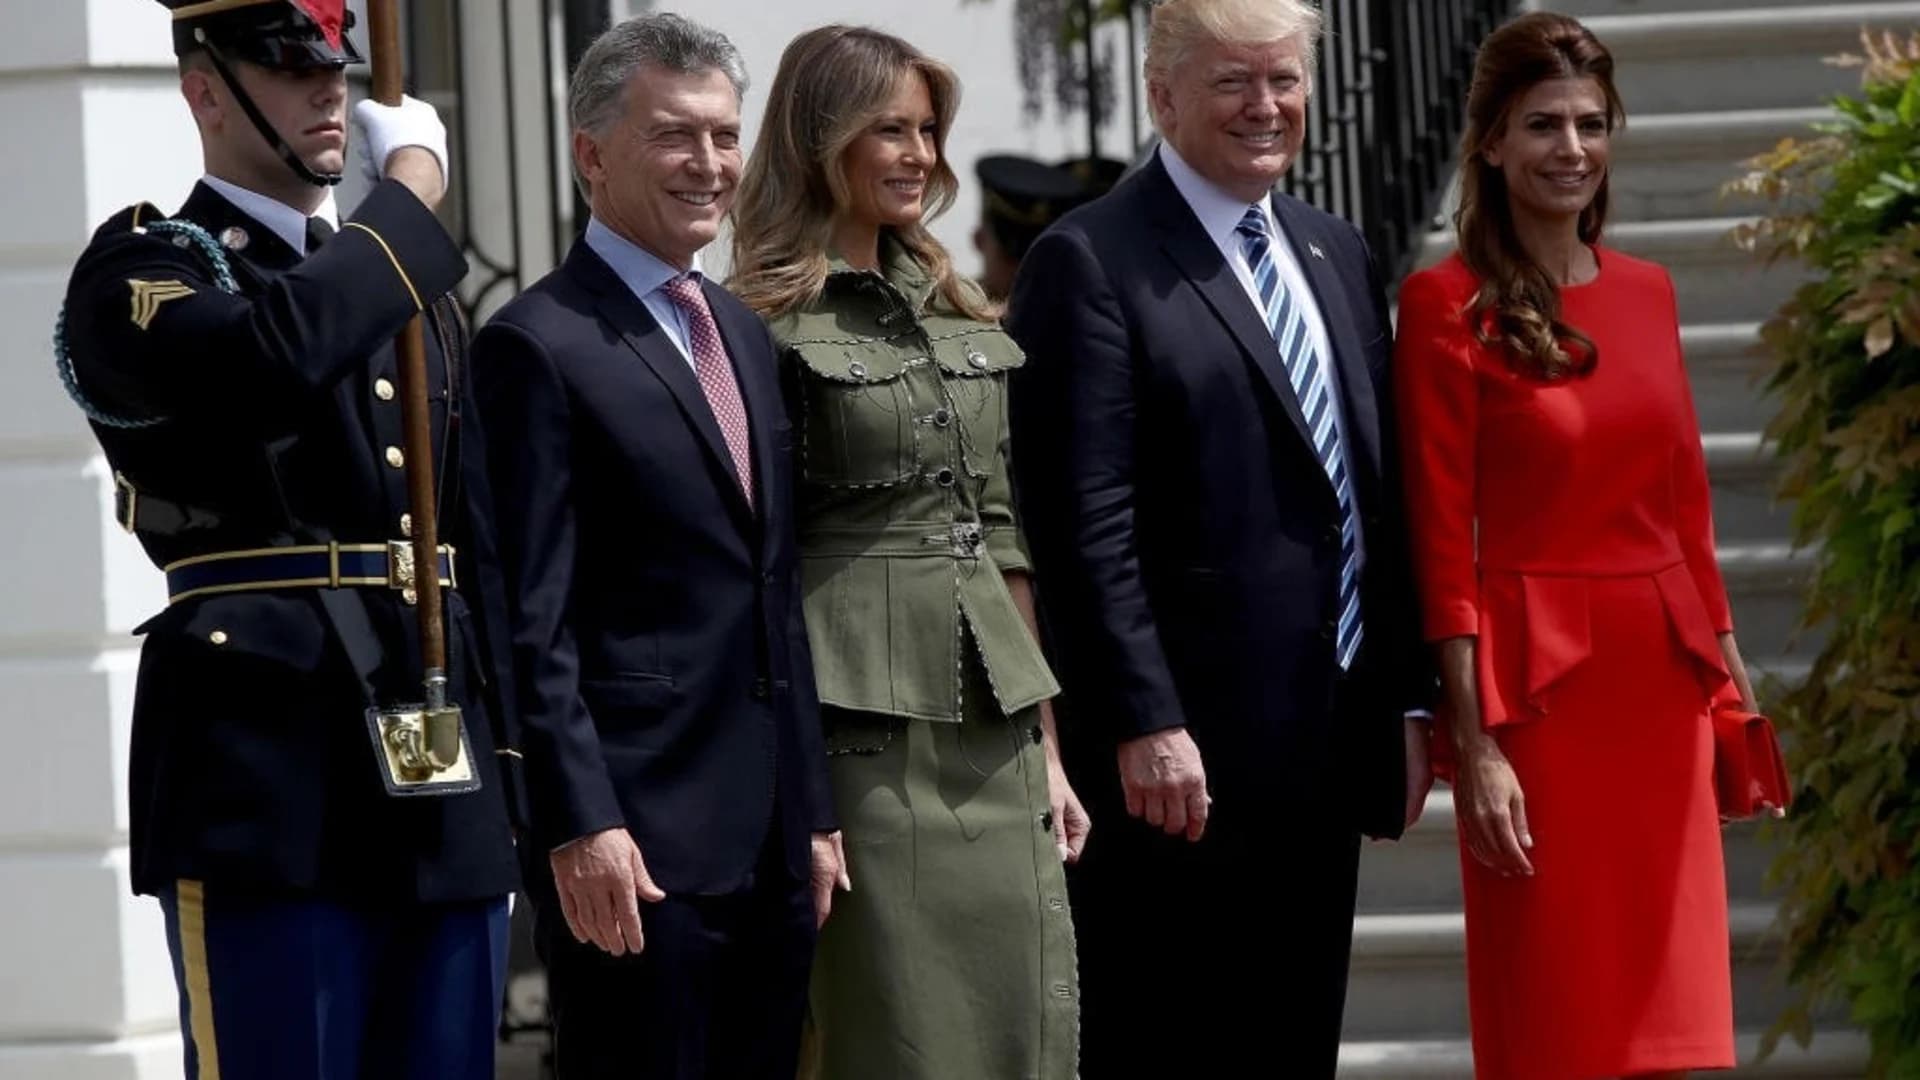 President Trump welcomes president of Argentina to the White House